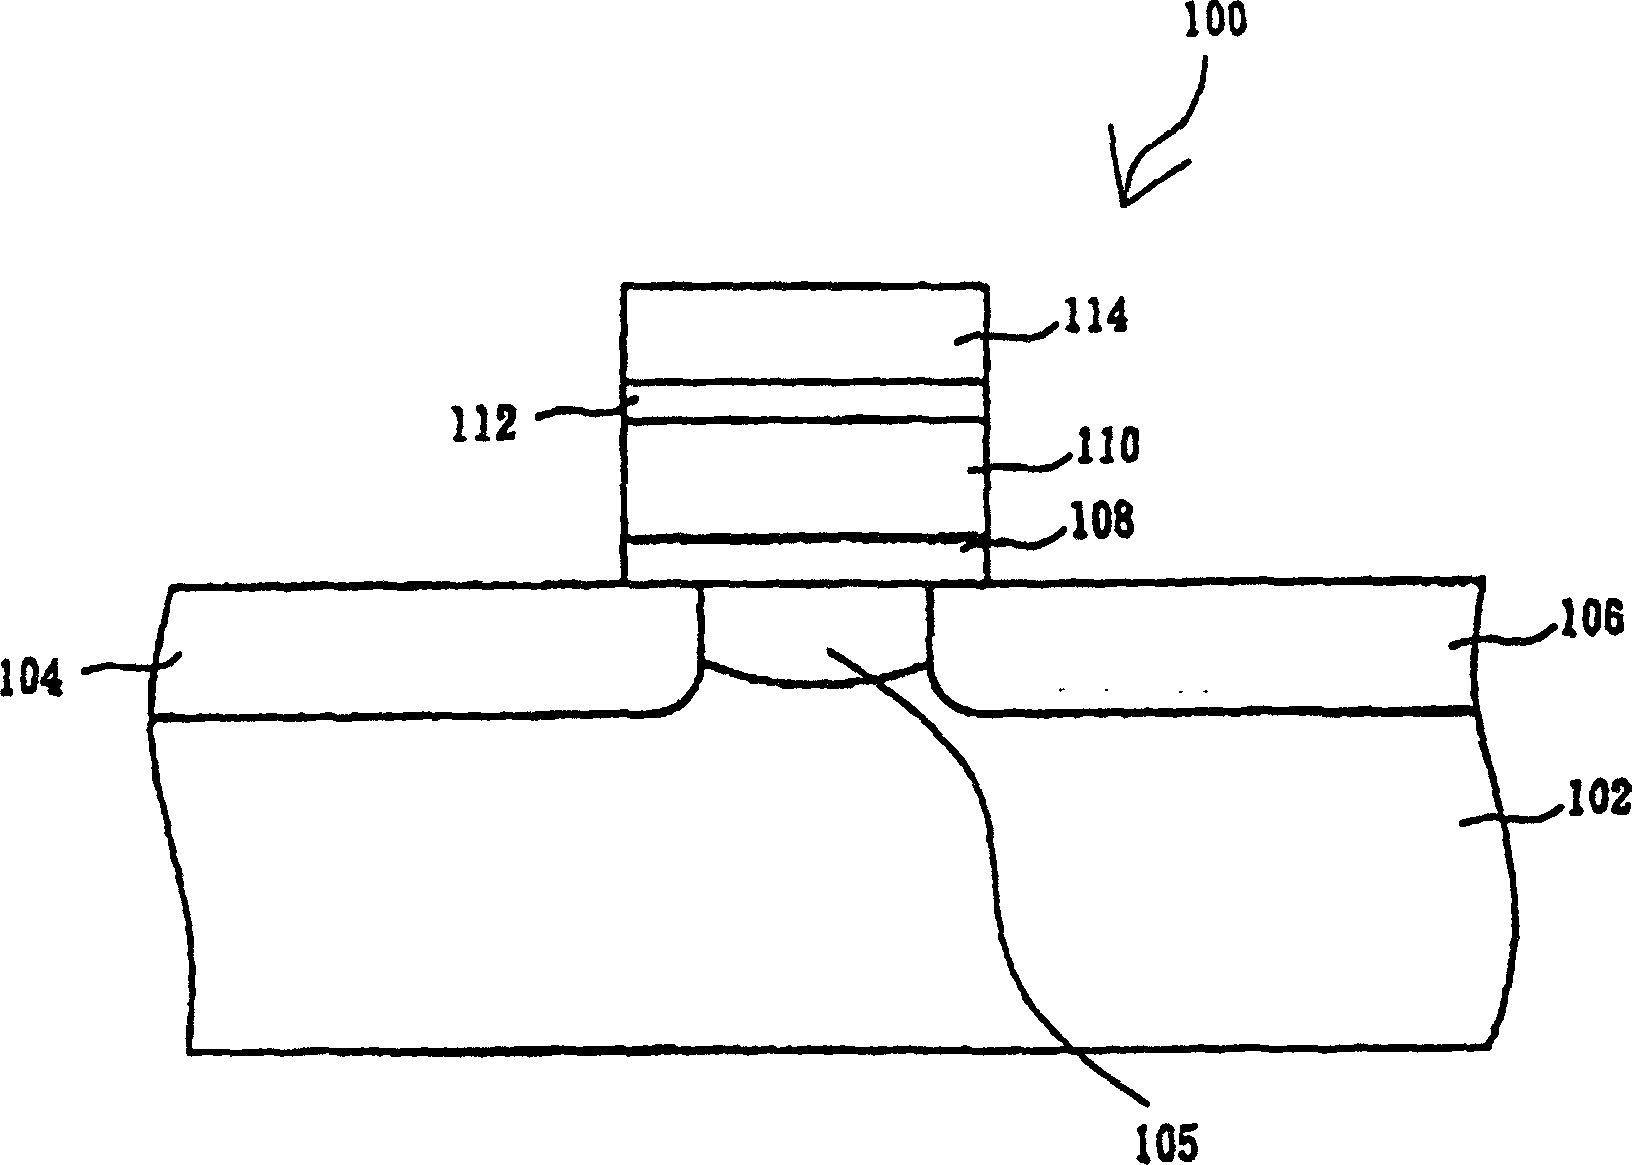 Structure of flash memory unit with planar surround grid and its manufacturing methods